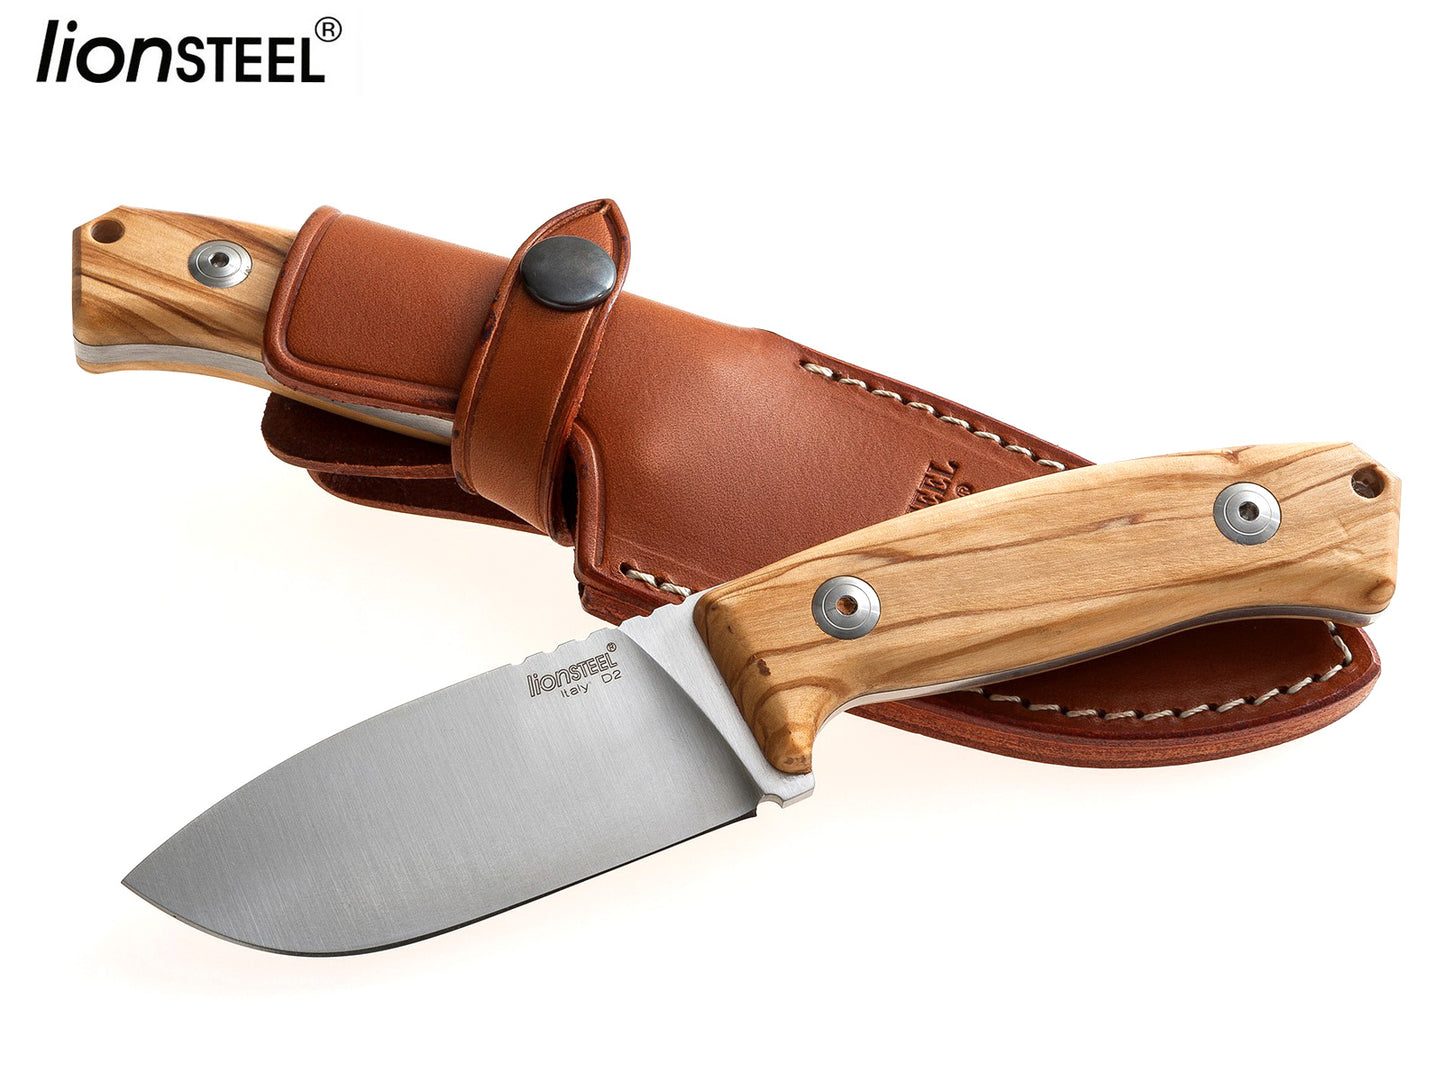 LionSteel M2 3.54" D2 Olive Wood Fixed Blade Knife with Leather Sheath